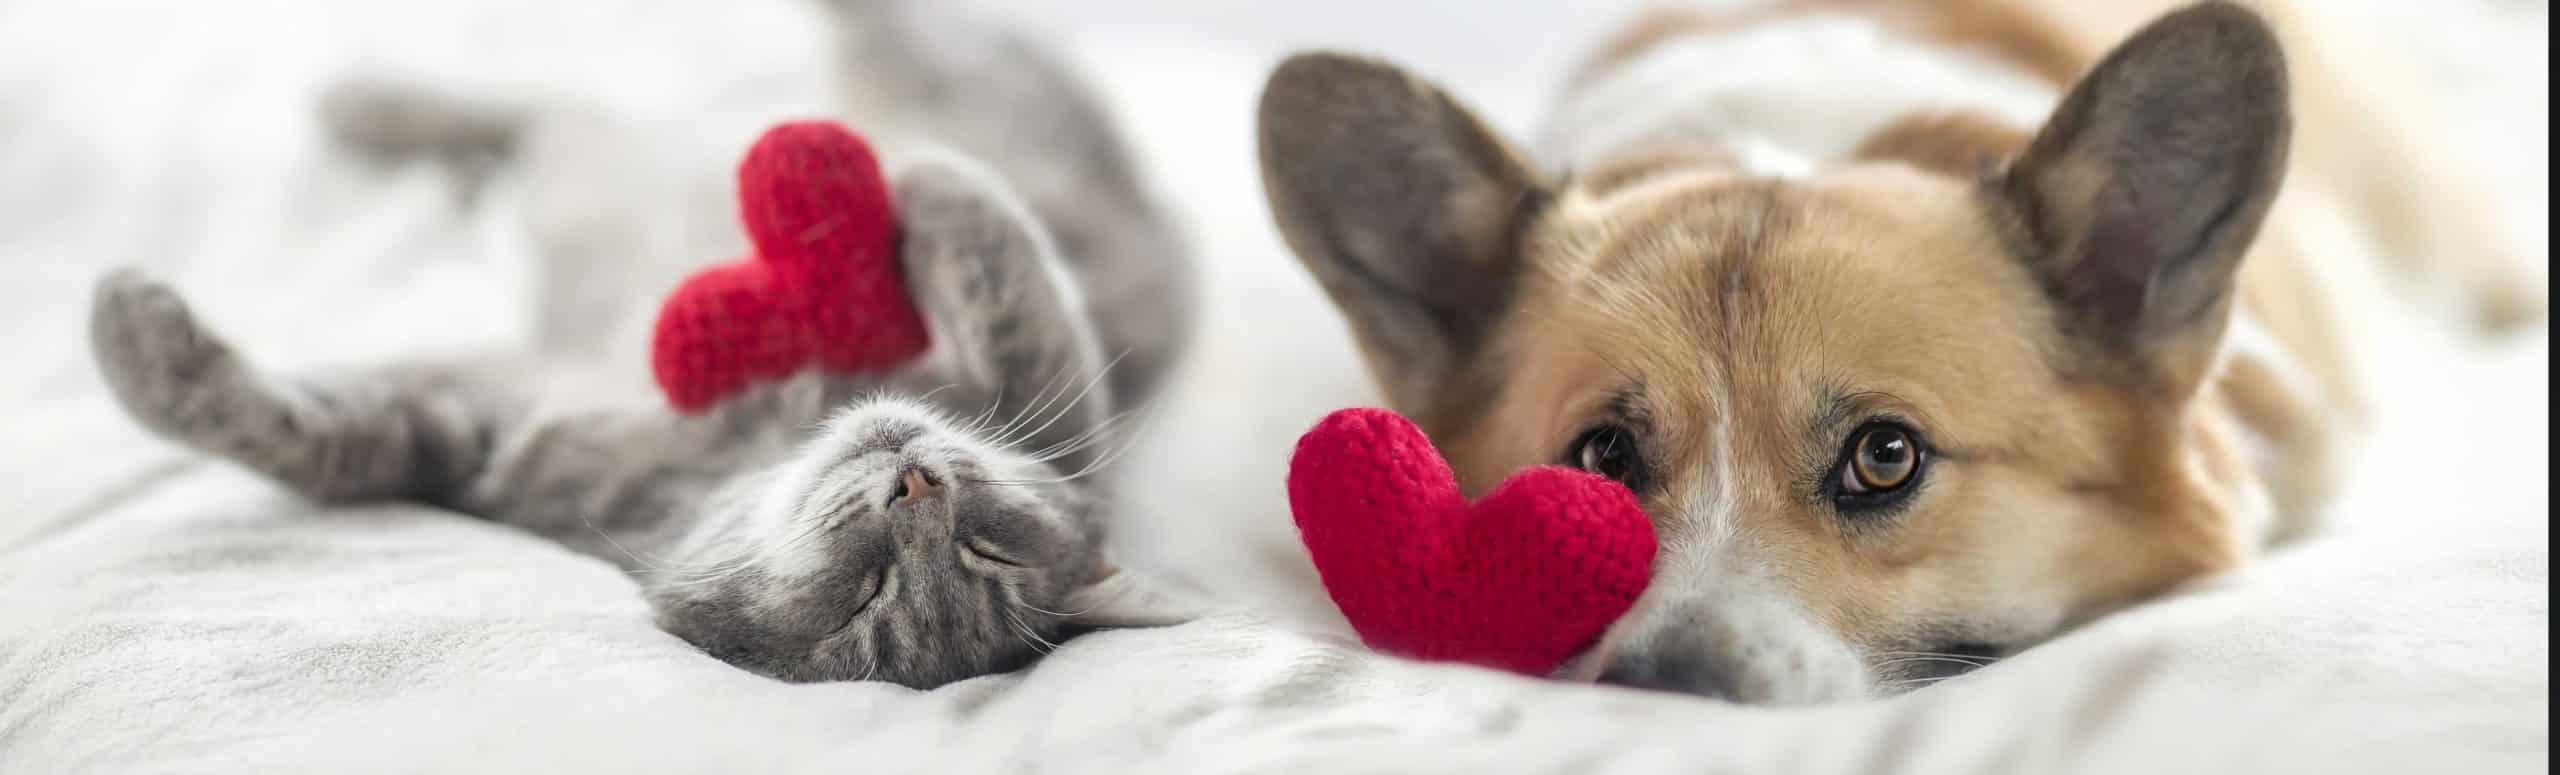 A corgi and grey cat laying down on a comfy surface with stuffed red heart toys